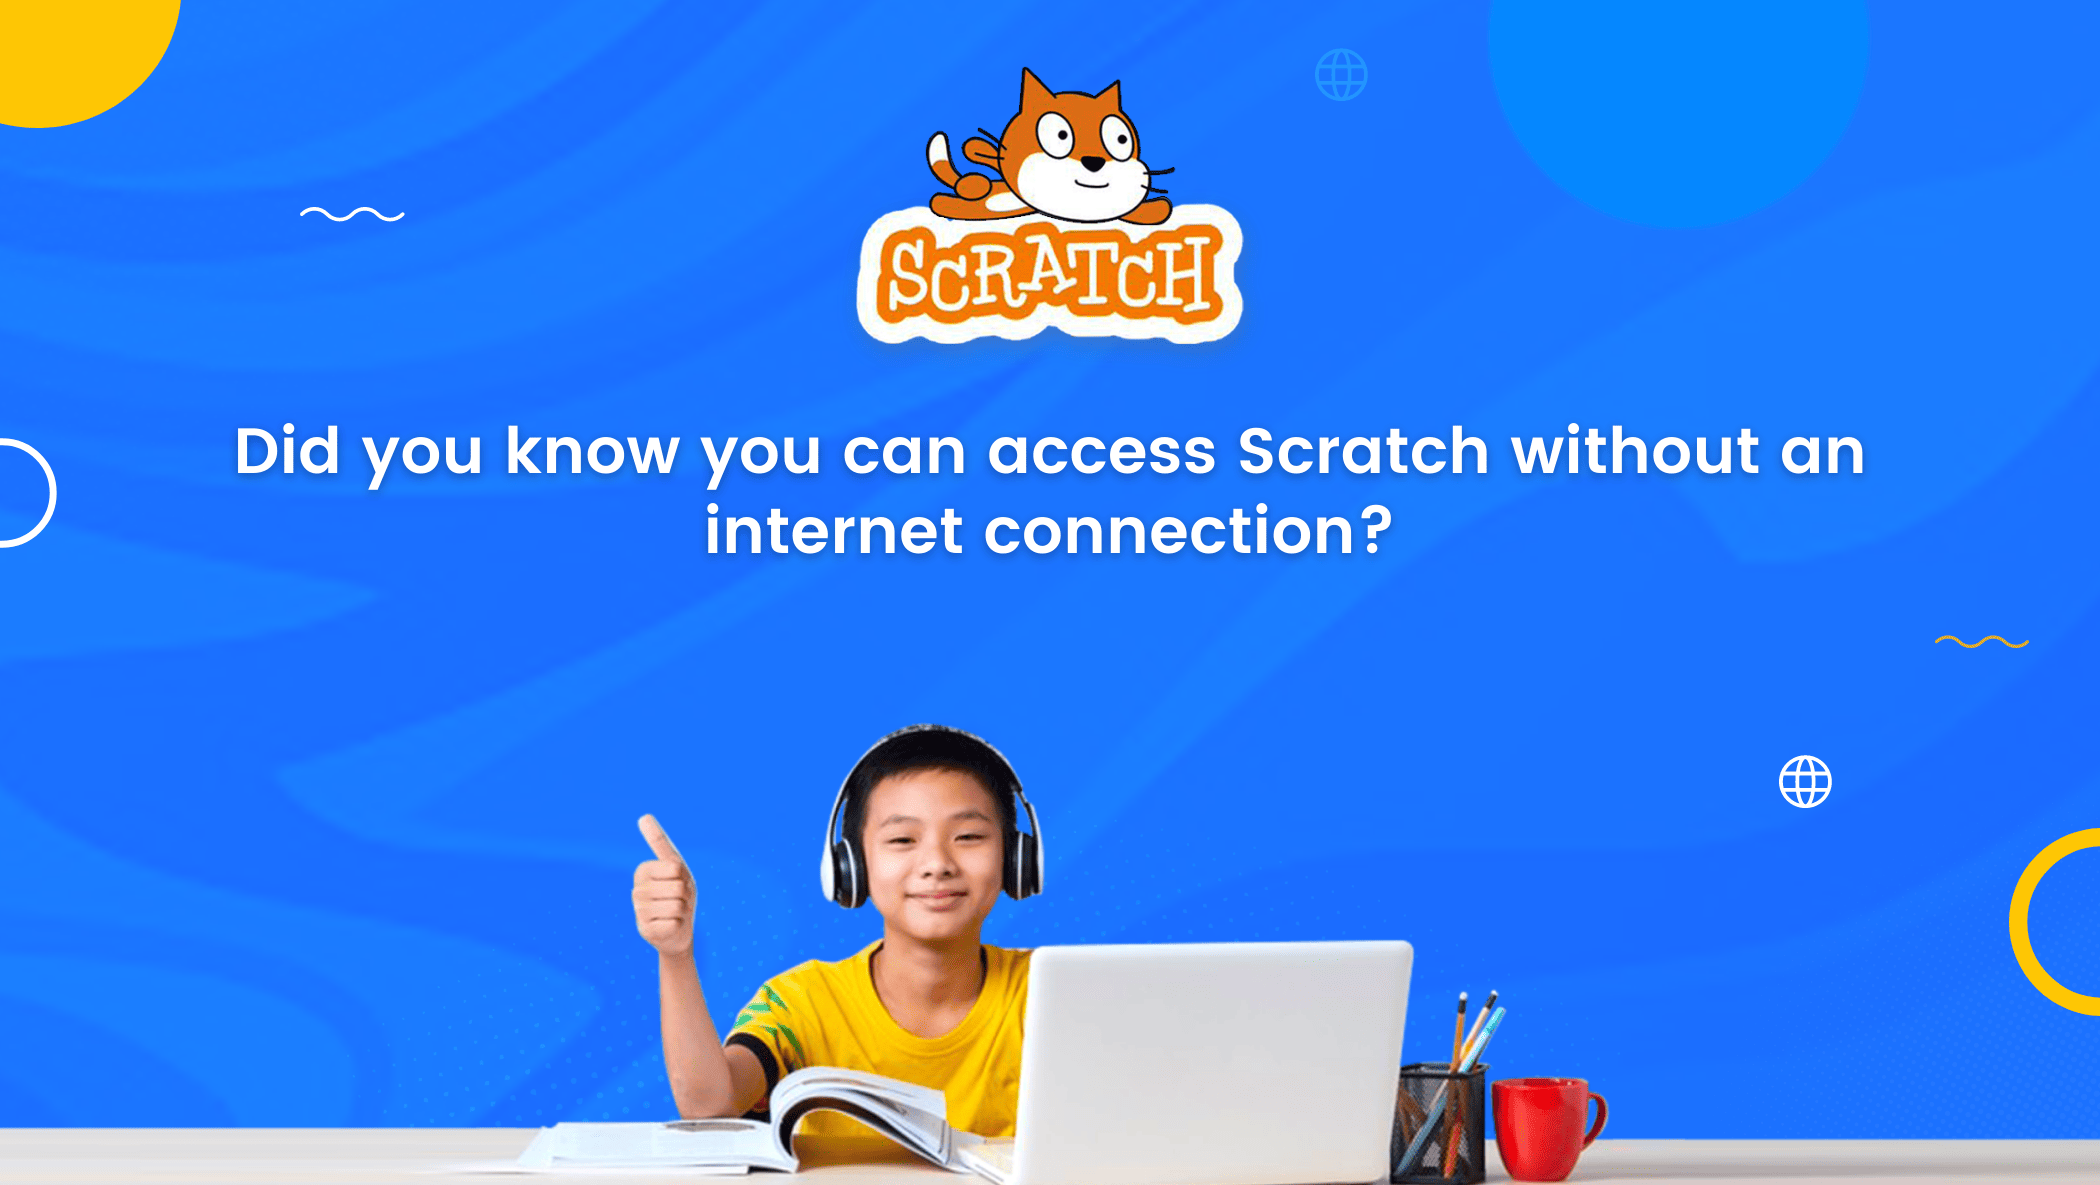 Did you know you can access Scratch without an internet connection